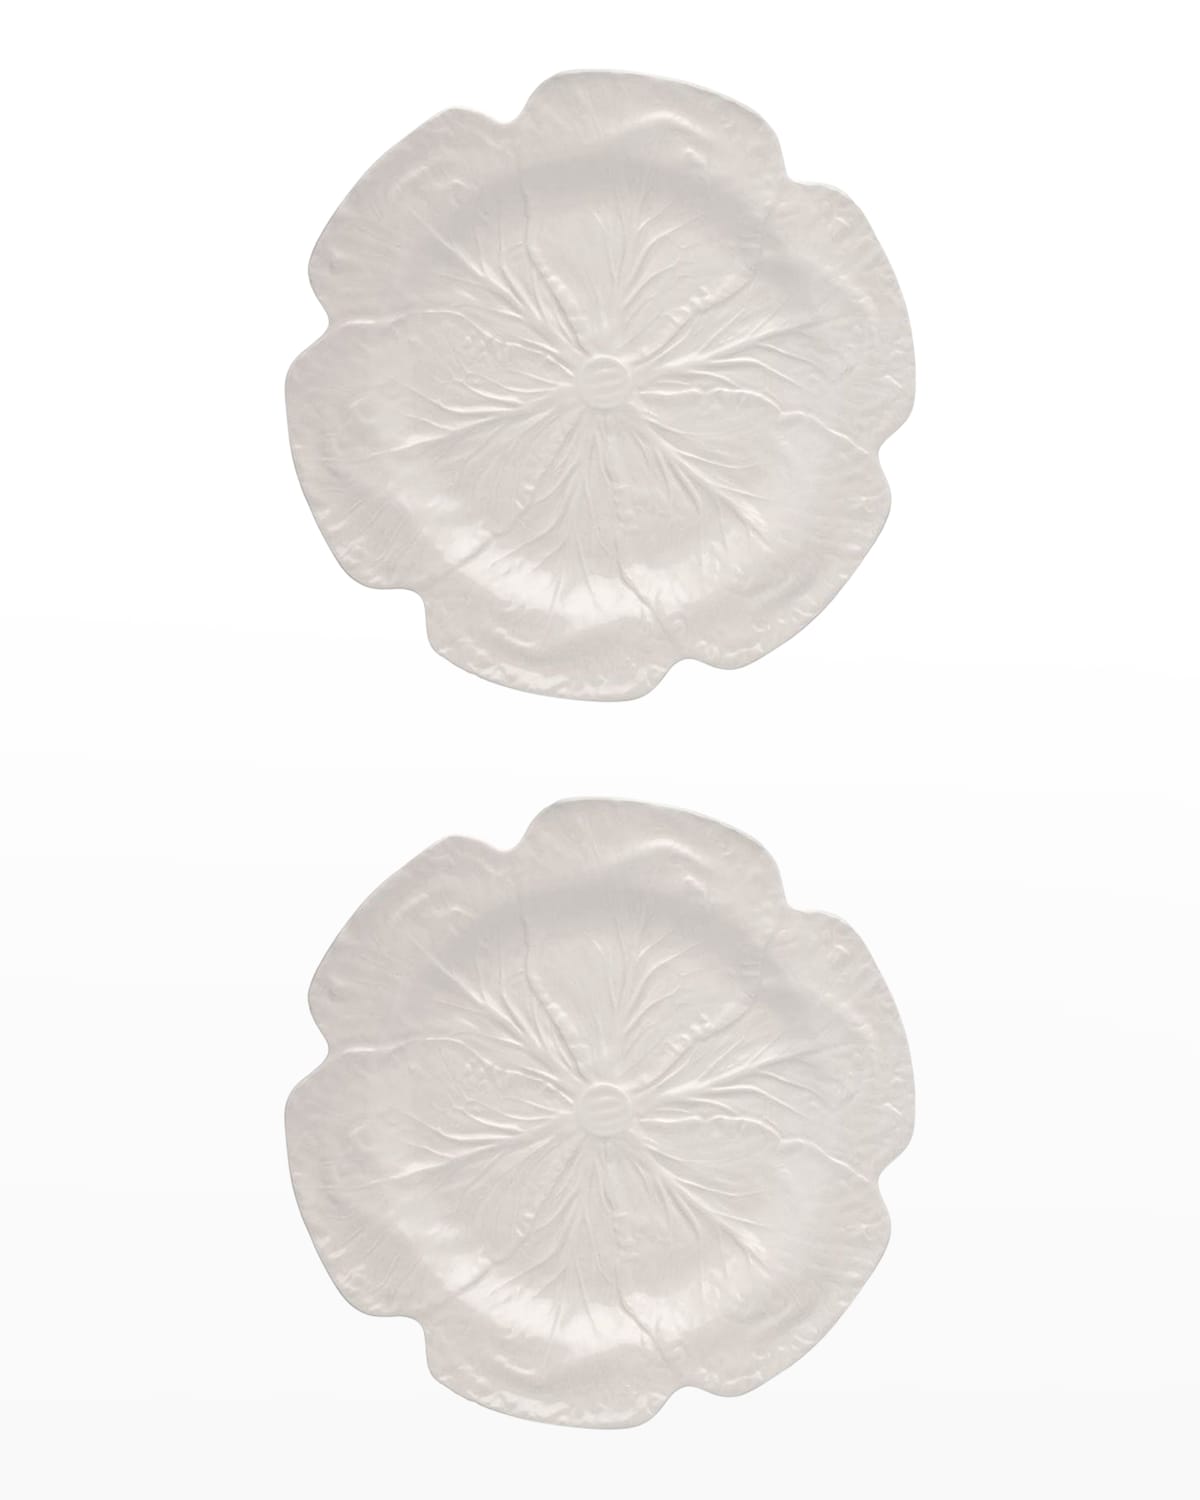 Cabbage Charger Plates, Beige - Set of 2